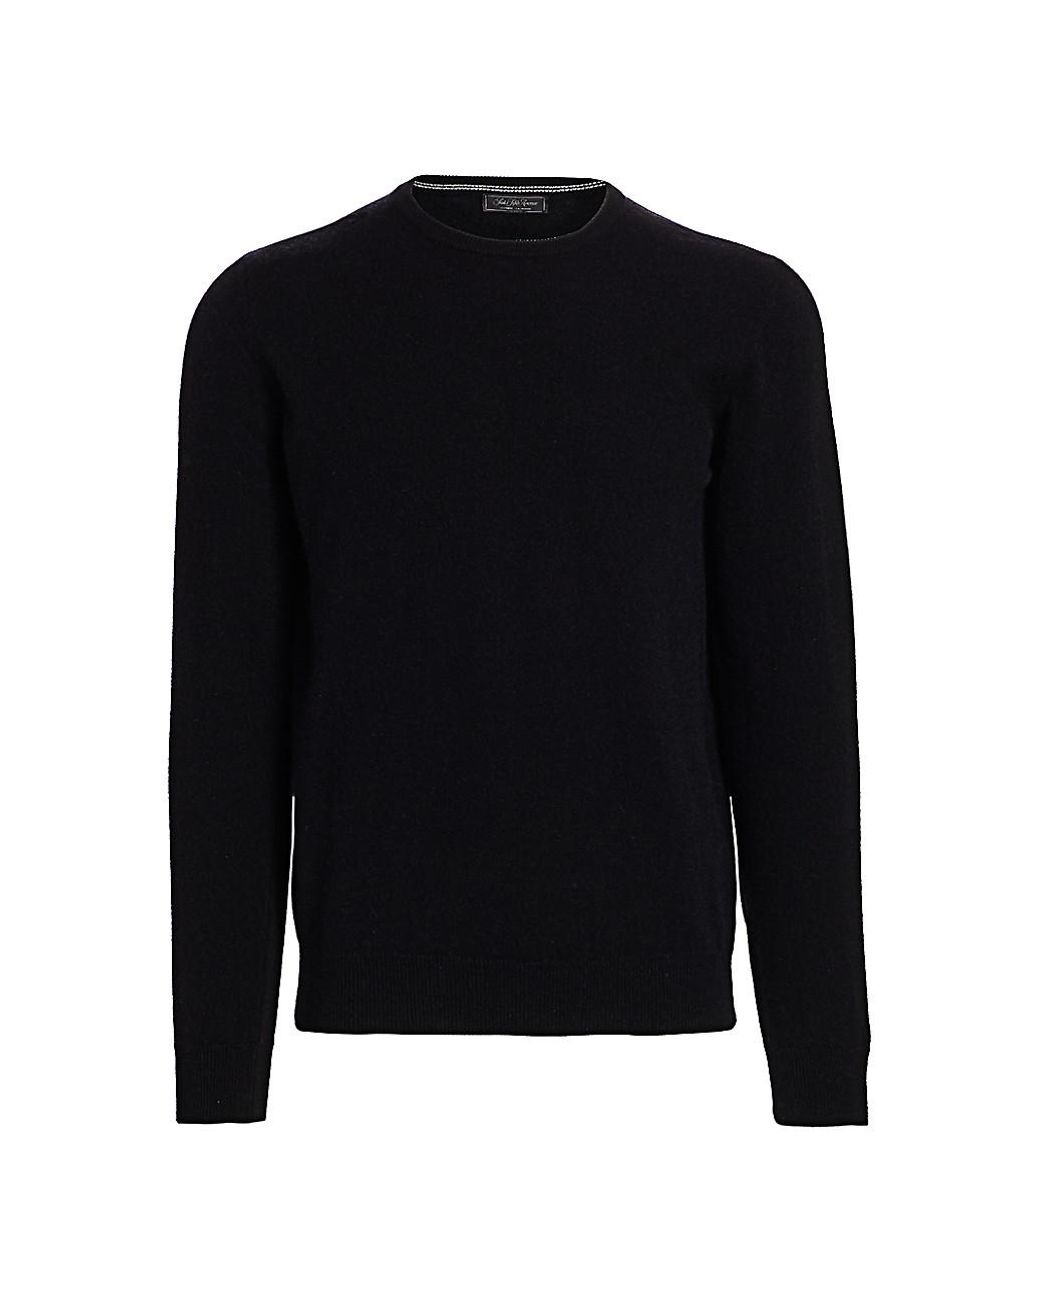 Saks Fifth Avenue Collection Cashmere Crew Sweater in Black for Men - Lyst